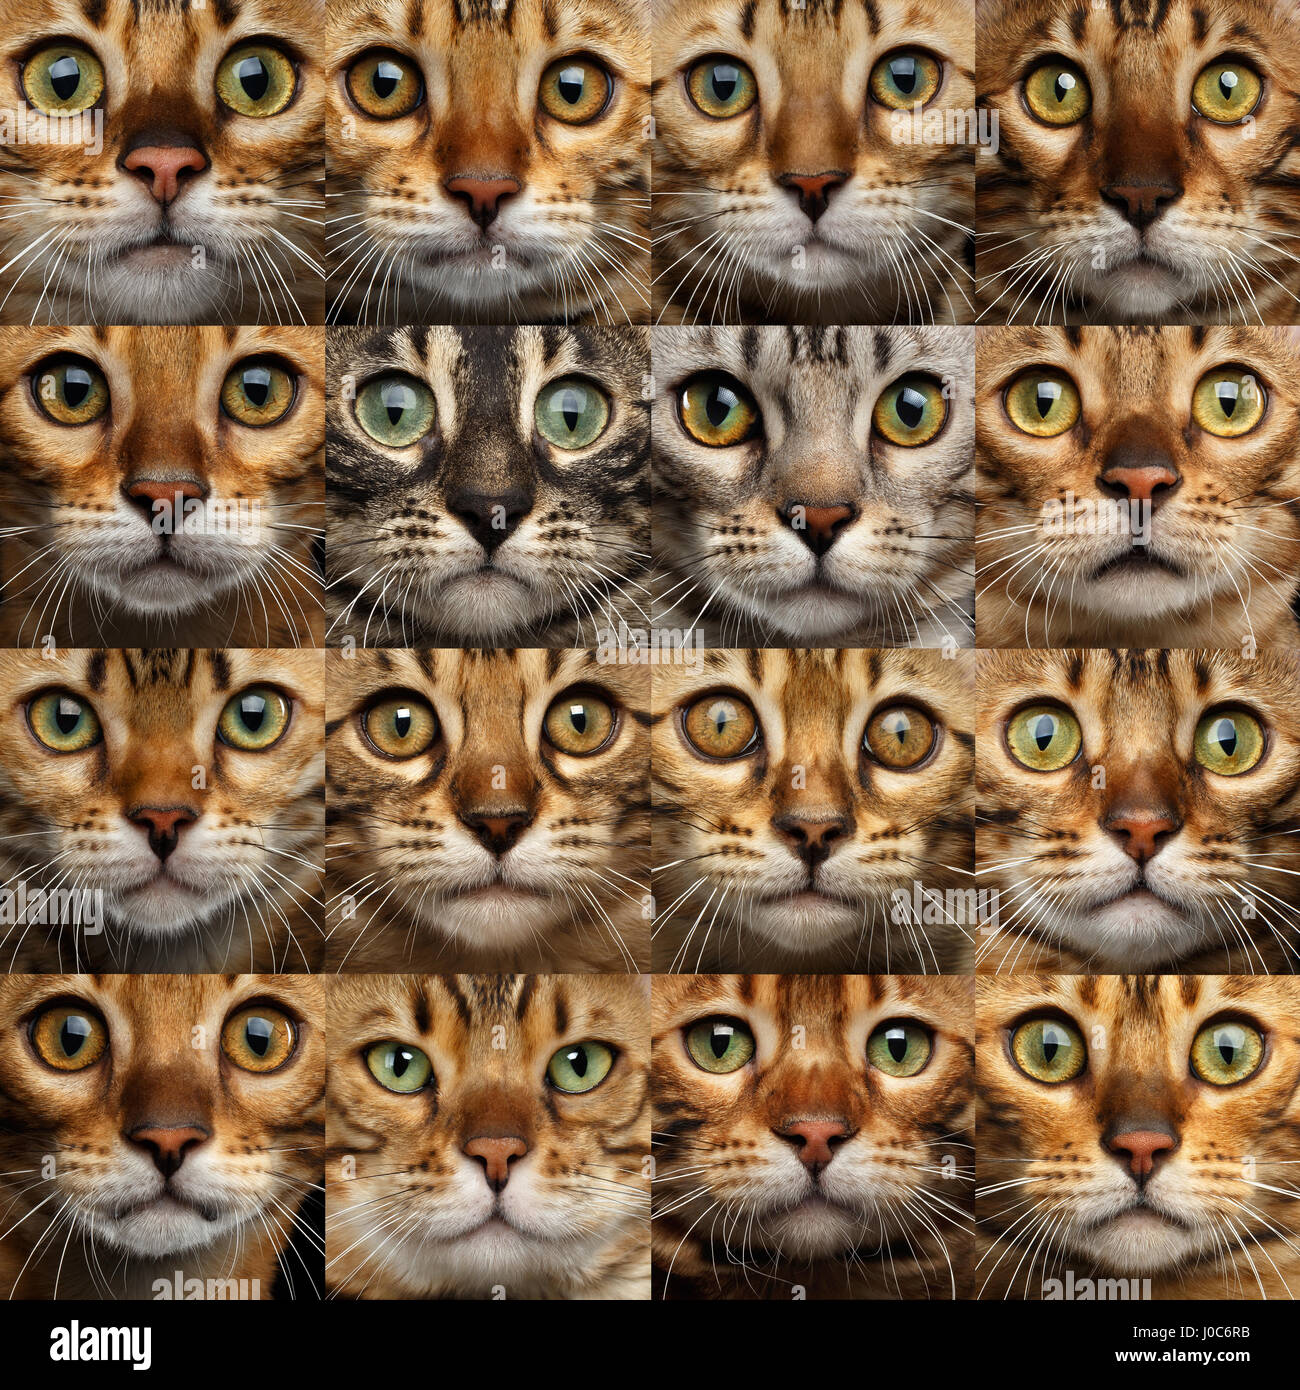 Collage of 16 Bengal Cat heads, compare different faces Stock Photo